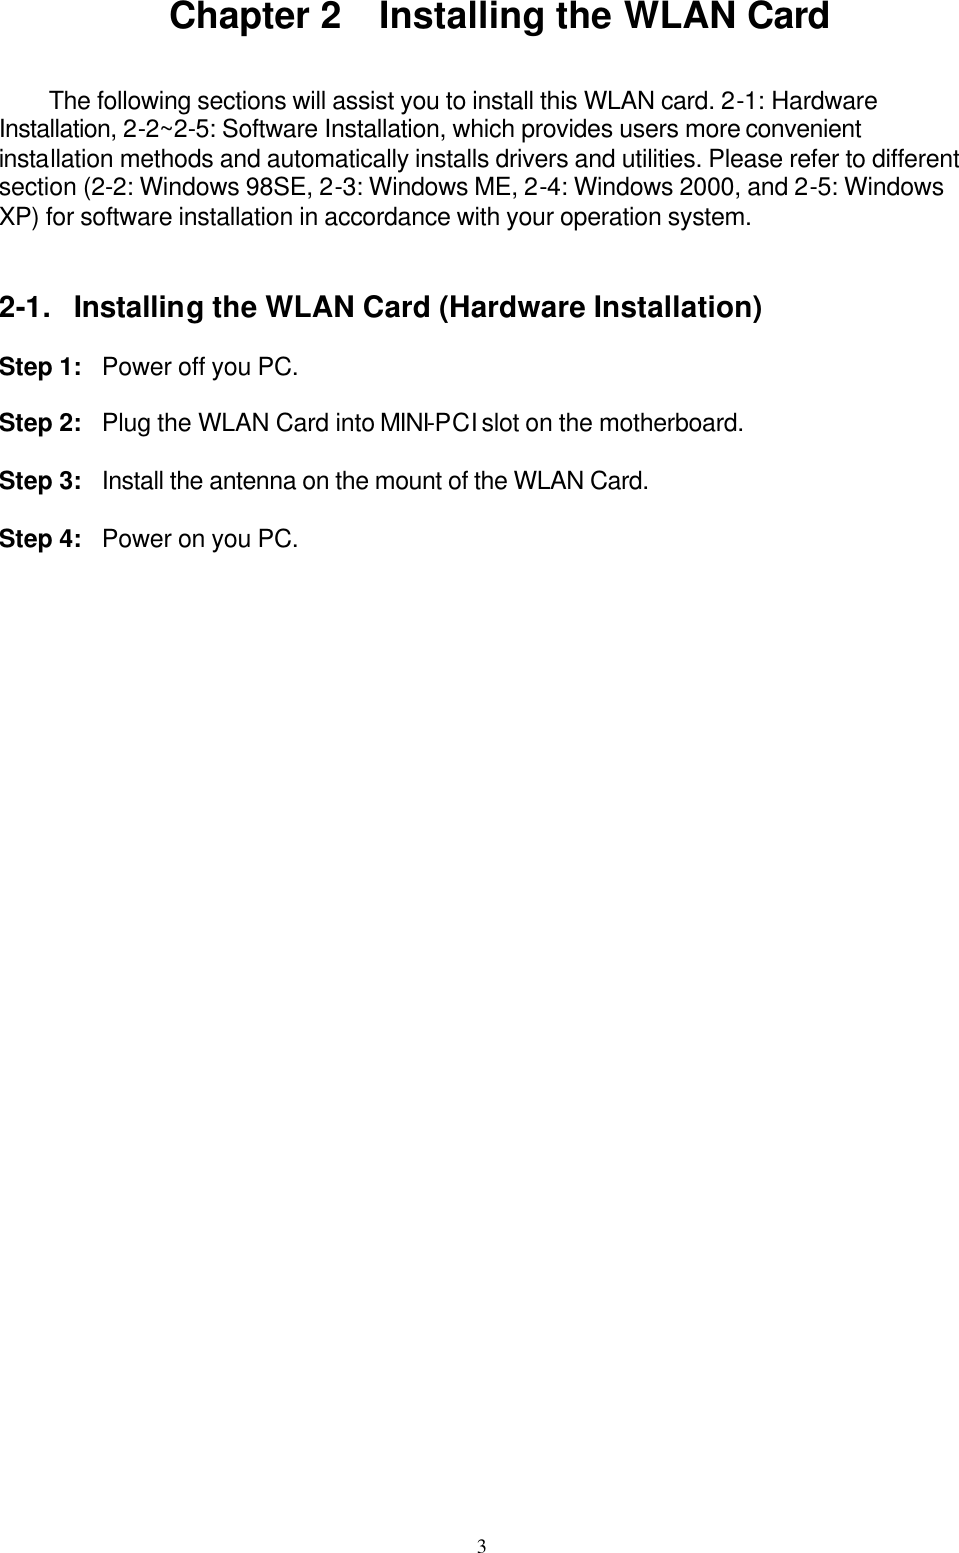 3  Chapter 2  Installing the WLAN Card   The following sections will assist you to install this WLAN card. 2-1: Hardware Installation, 2-2~2-5: Software Installation, which provides users more convenient installation methods and automatically installs drivers and utilities. Please refer to different section (2-2: Windows 98SE, 2-3: Windows ME, 2-4: Windows 2000, and 2-5: Windows XP) for software installation in accordance with your operation system.   2-1. Installing the WLAN Card (Hardware Installation)  Step 1: Power off you PC.  Step 2: Plug the WLAN Card into MINI-PCI slot on the motherboard.  Step 3: Install the antenna on the mount of the WLAN Card.  Step 4: Power on you PC.  